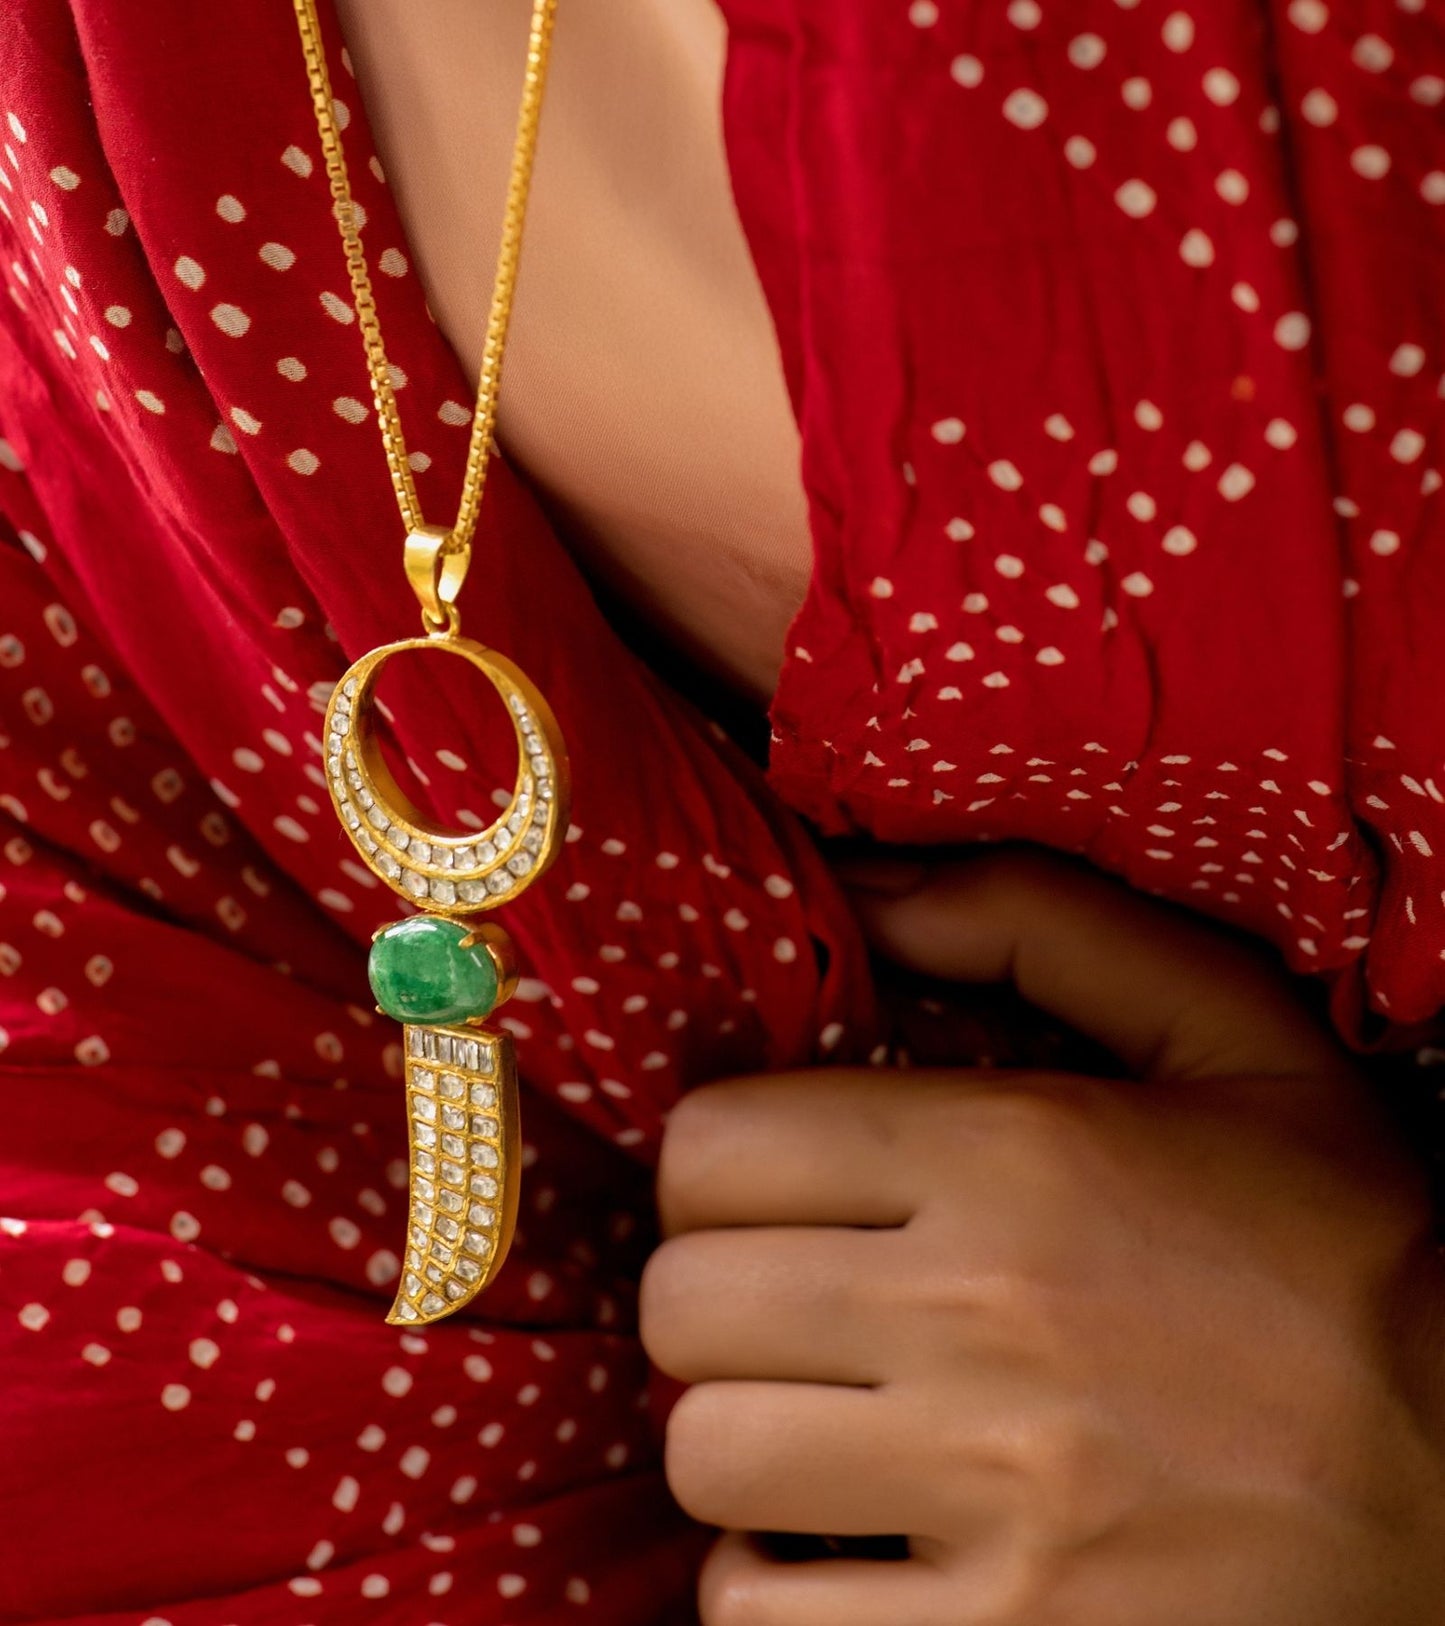 The Polki Studded Vagh Nakh Medallion on Chain in Gold-Festive Jewelry